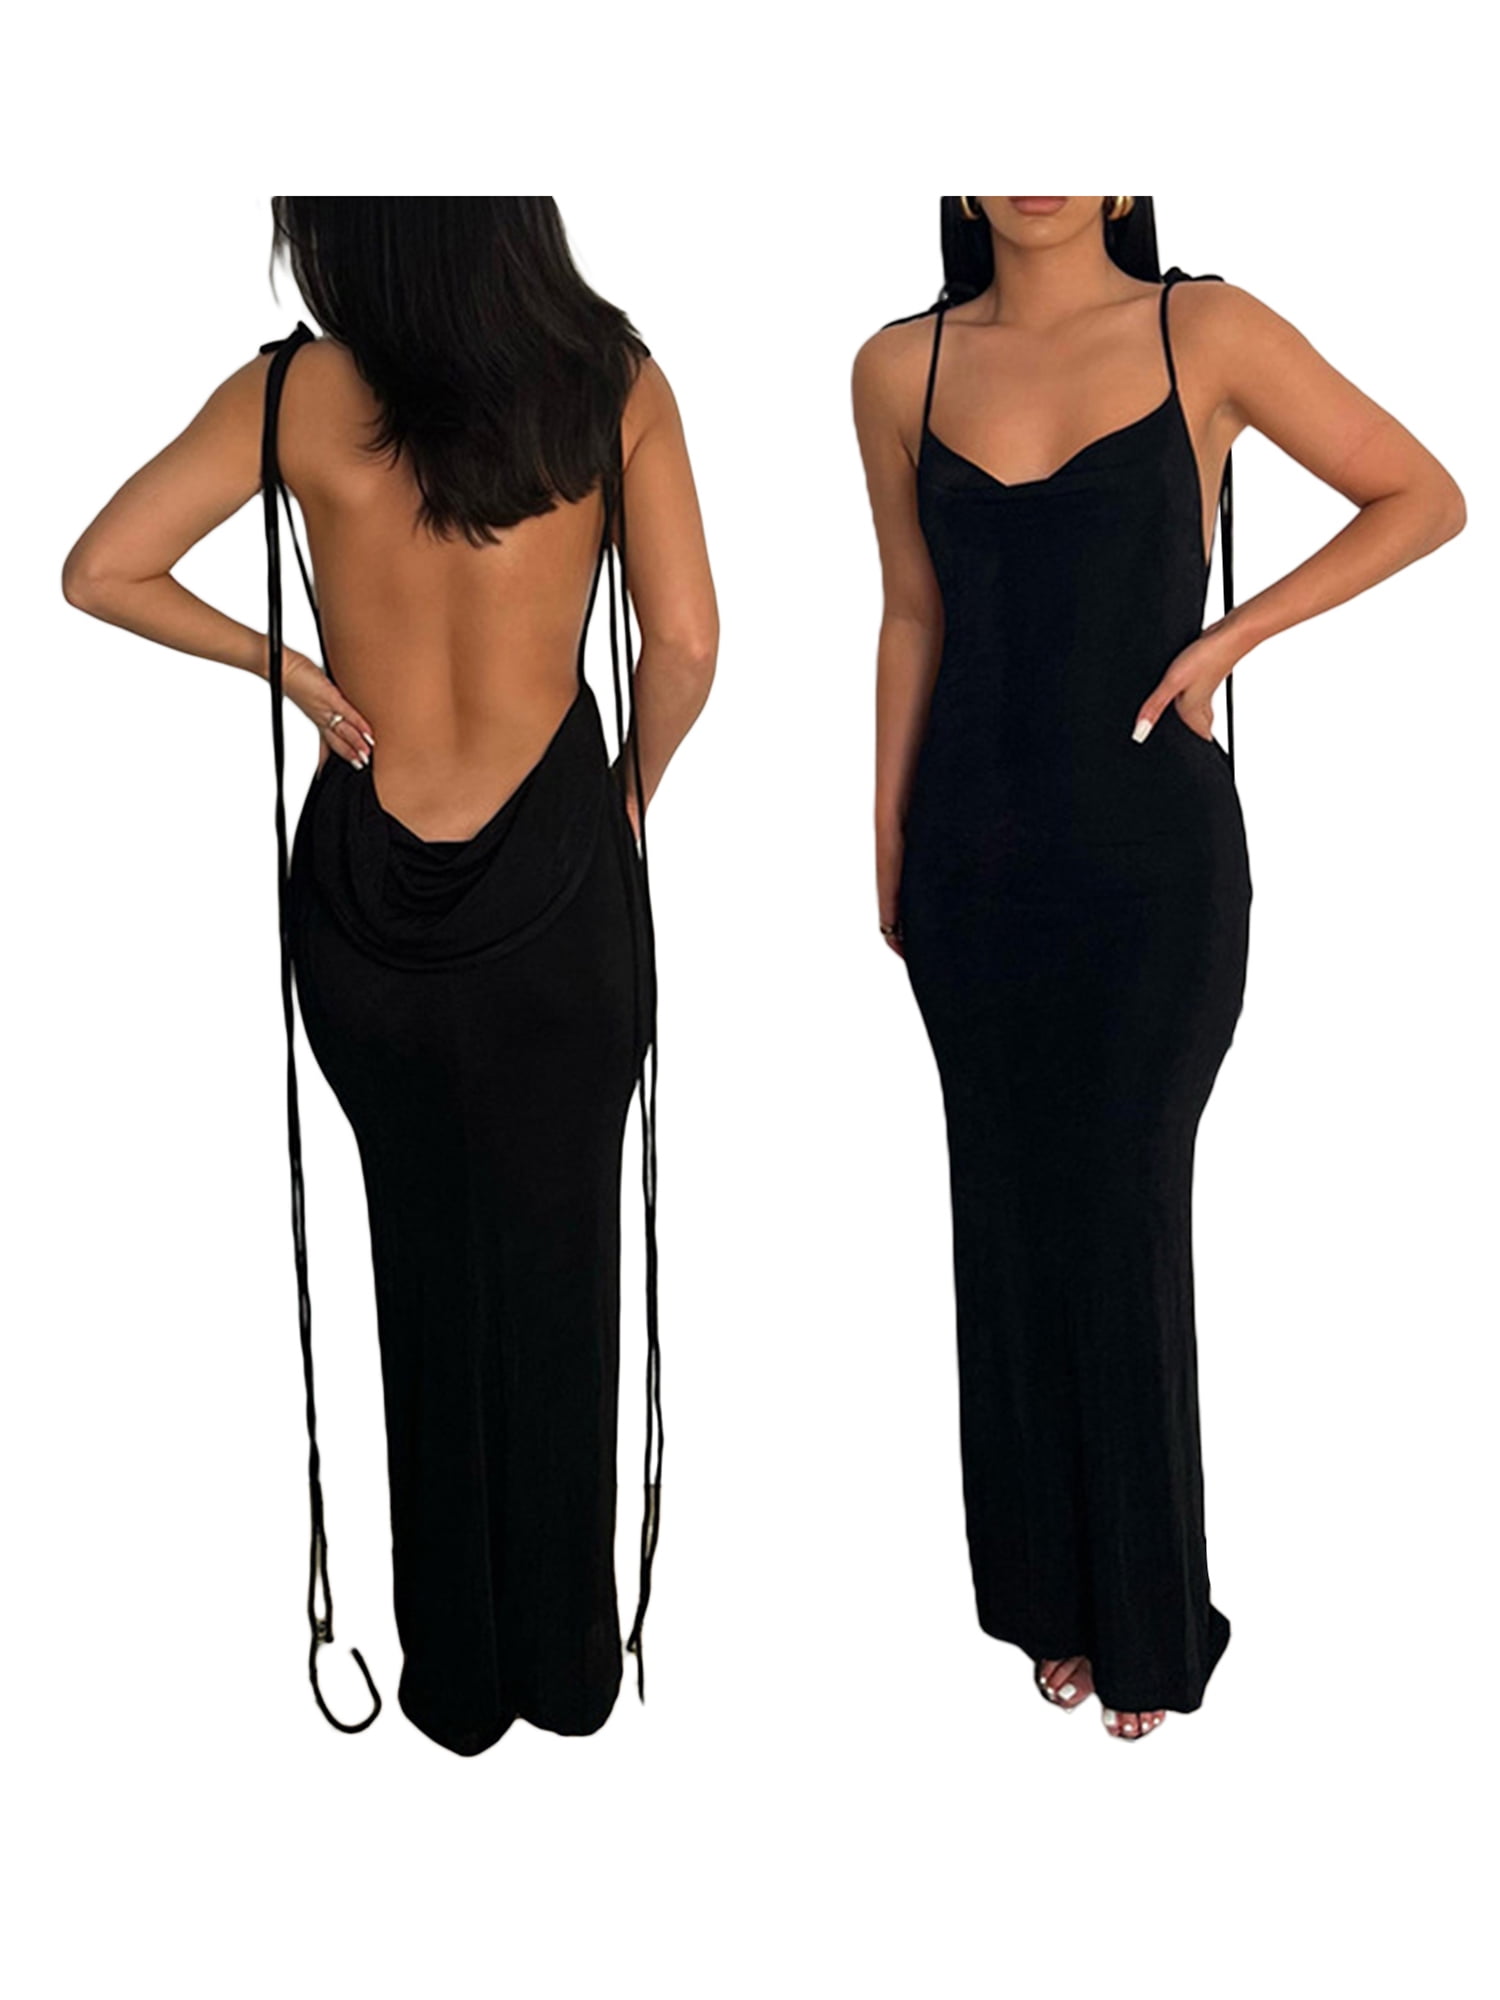 Women Backless Maxi Dress Bodycon Sexy Open Back Square Neck Going Out  Elegant Party Tank Dress Low Cut Dress